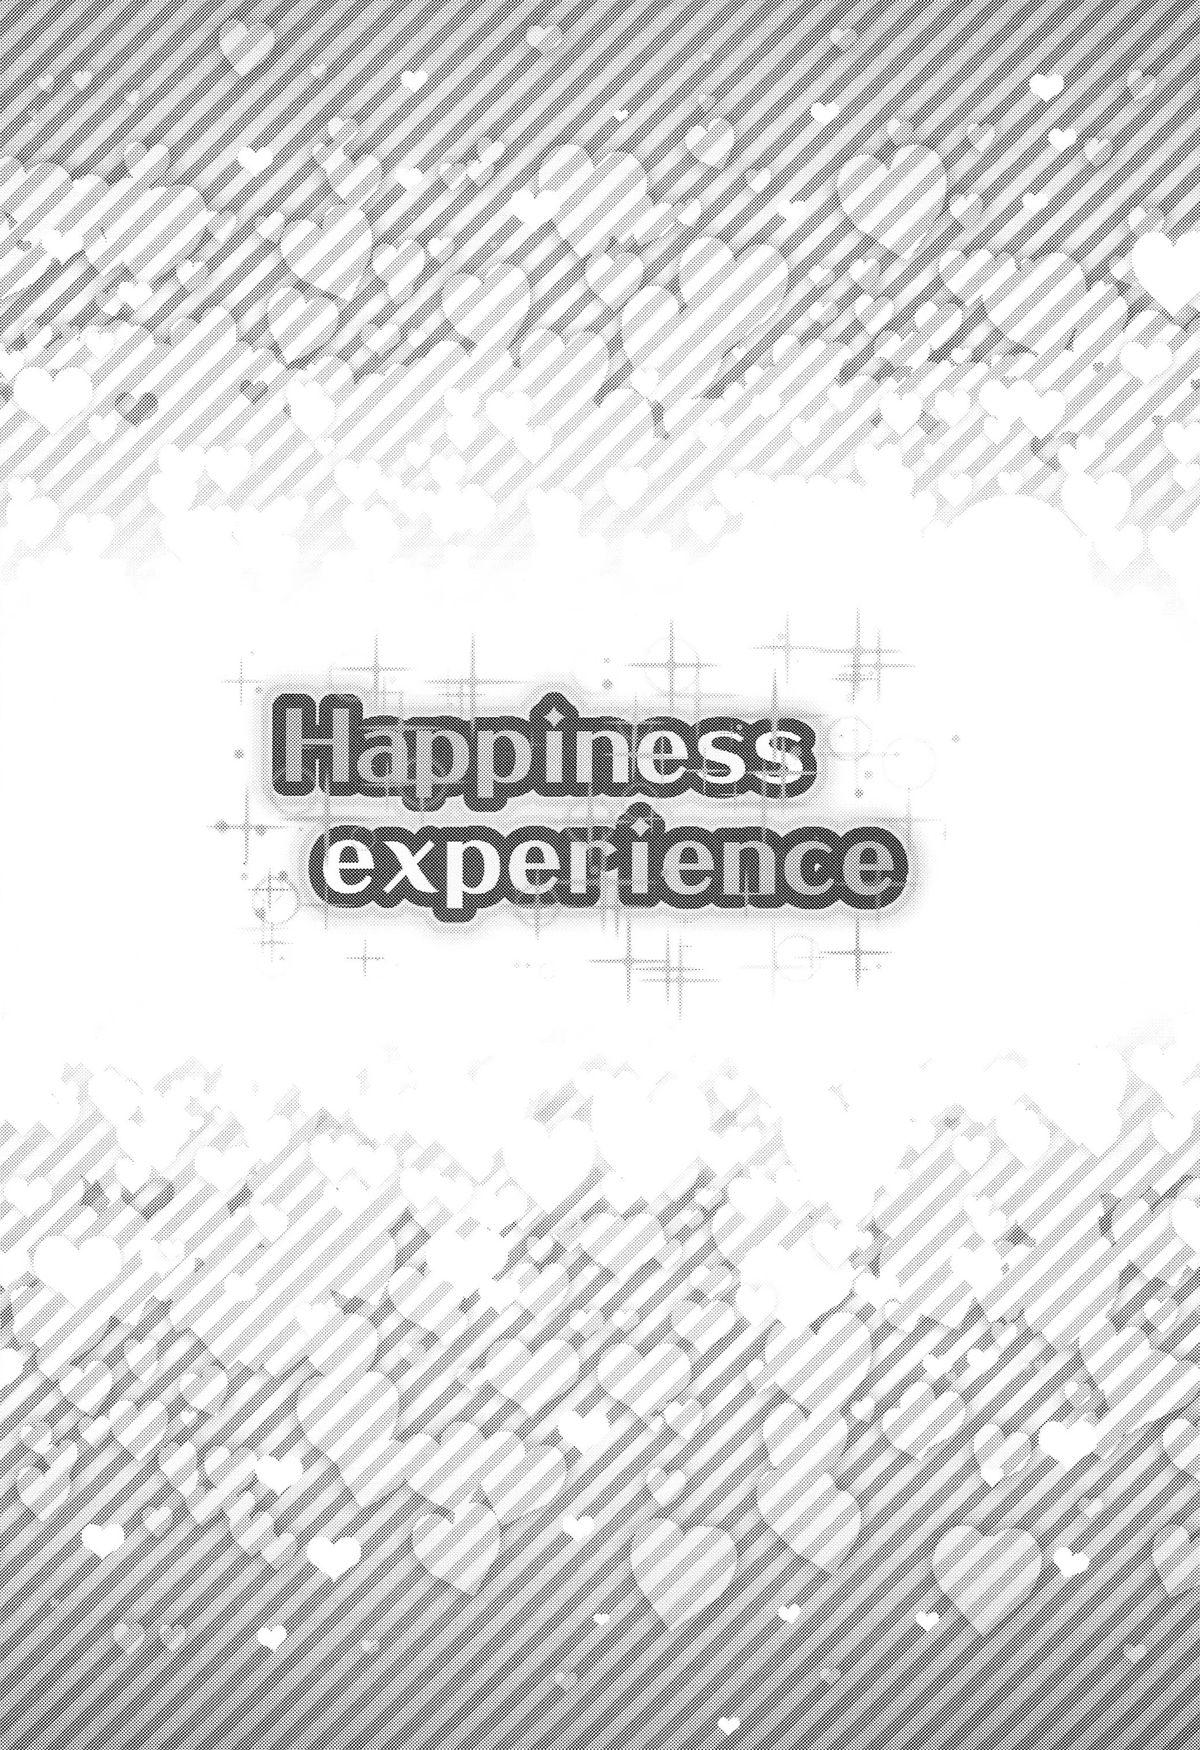 Happiness experience 5